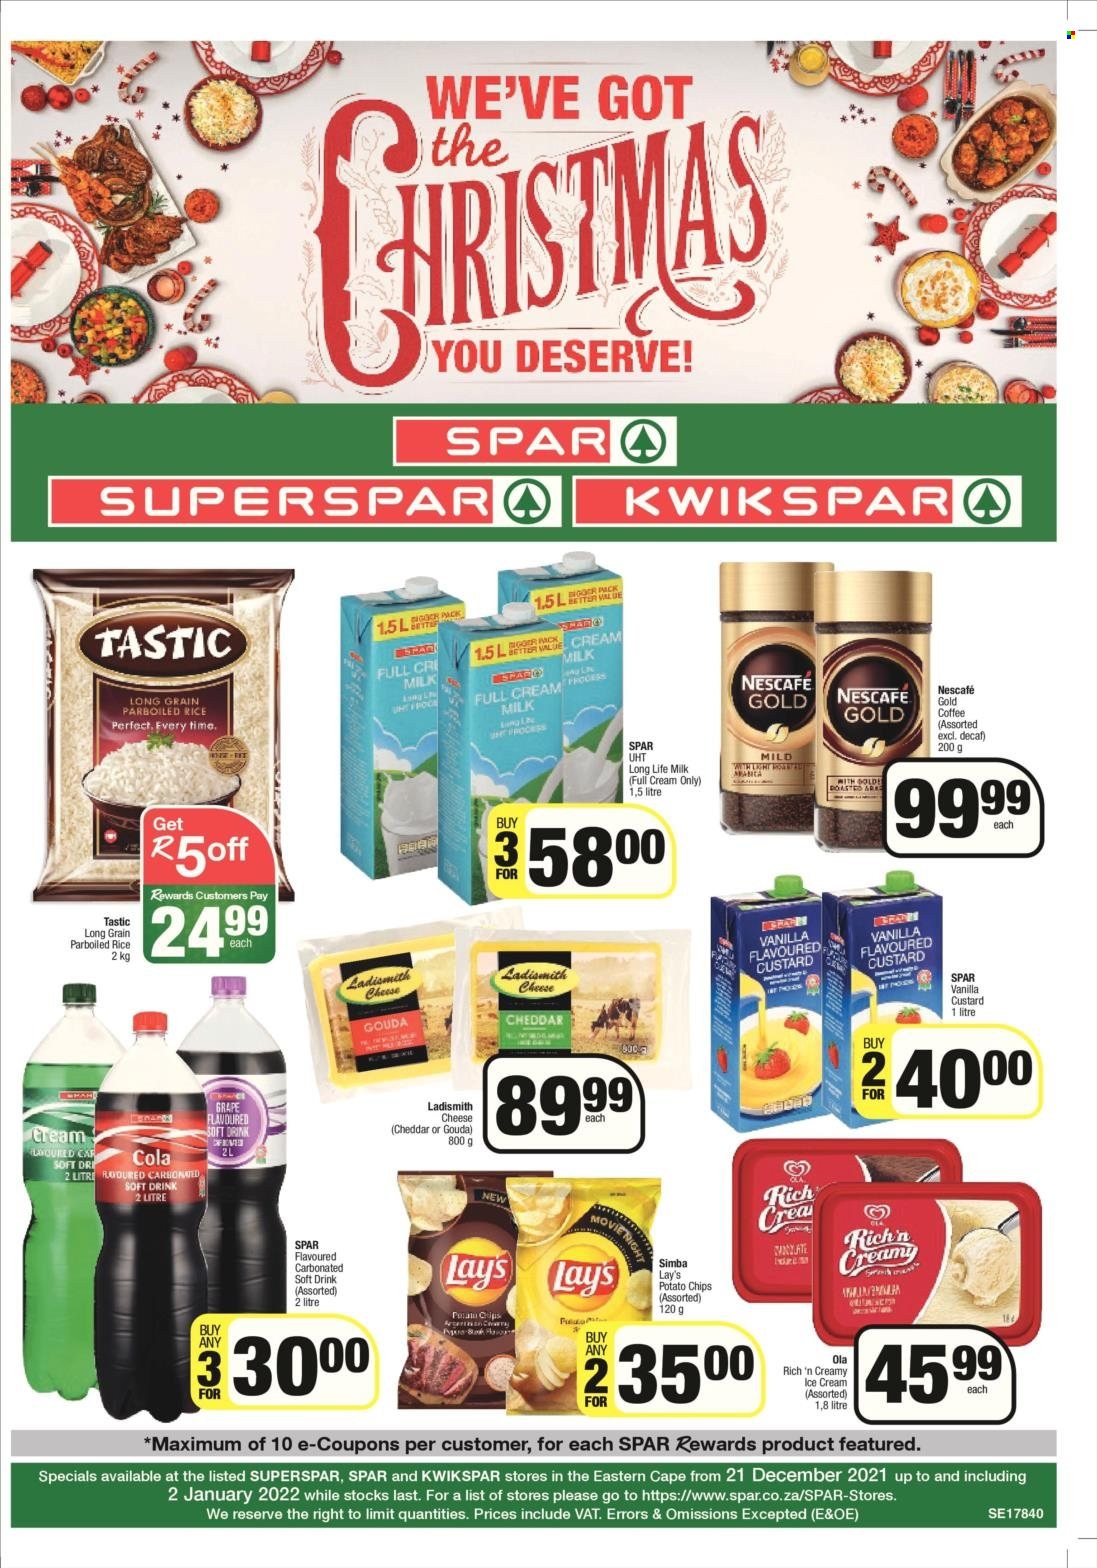 SPAR catalogue  - 21/12/2021 - 02/01/2022 - Sales products - gouda, cheese, custard, long life milk, Ladismith, ice cream, Ola, potato chips, chips, Lay's, Simba, rice, parboiled rice, Tastic, soft drink, carbonated soft drink, coffee, Nescafé. Page 1.